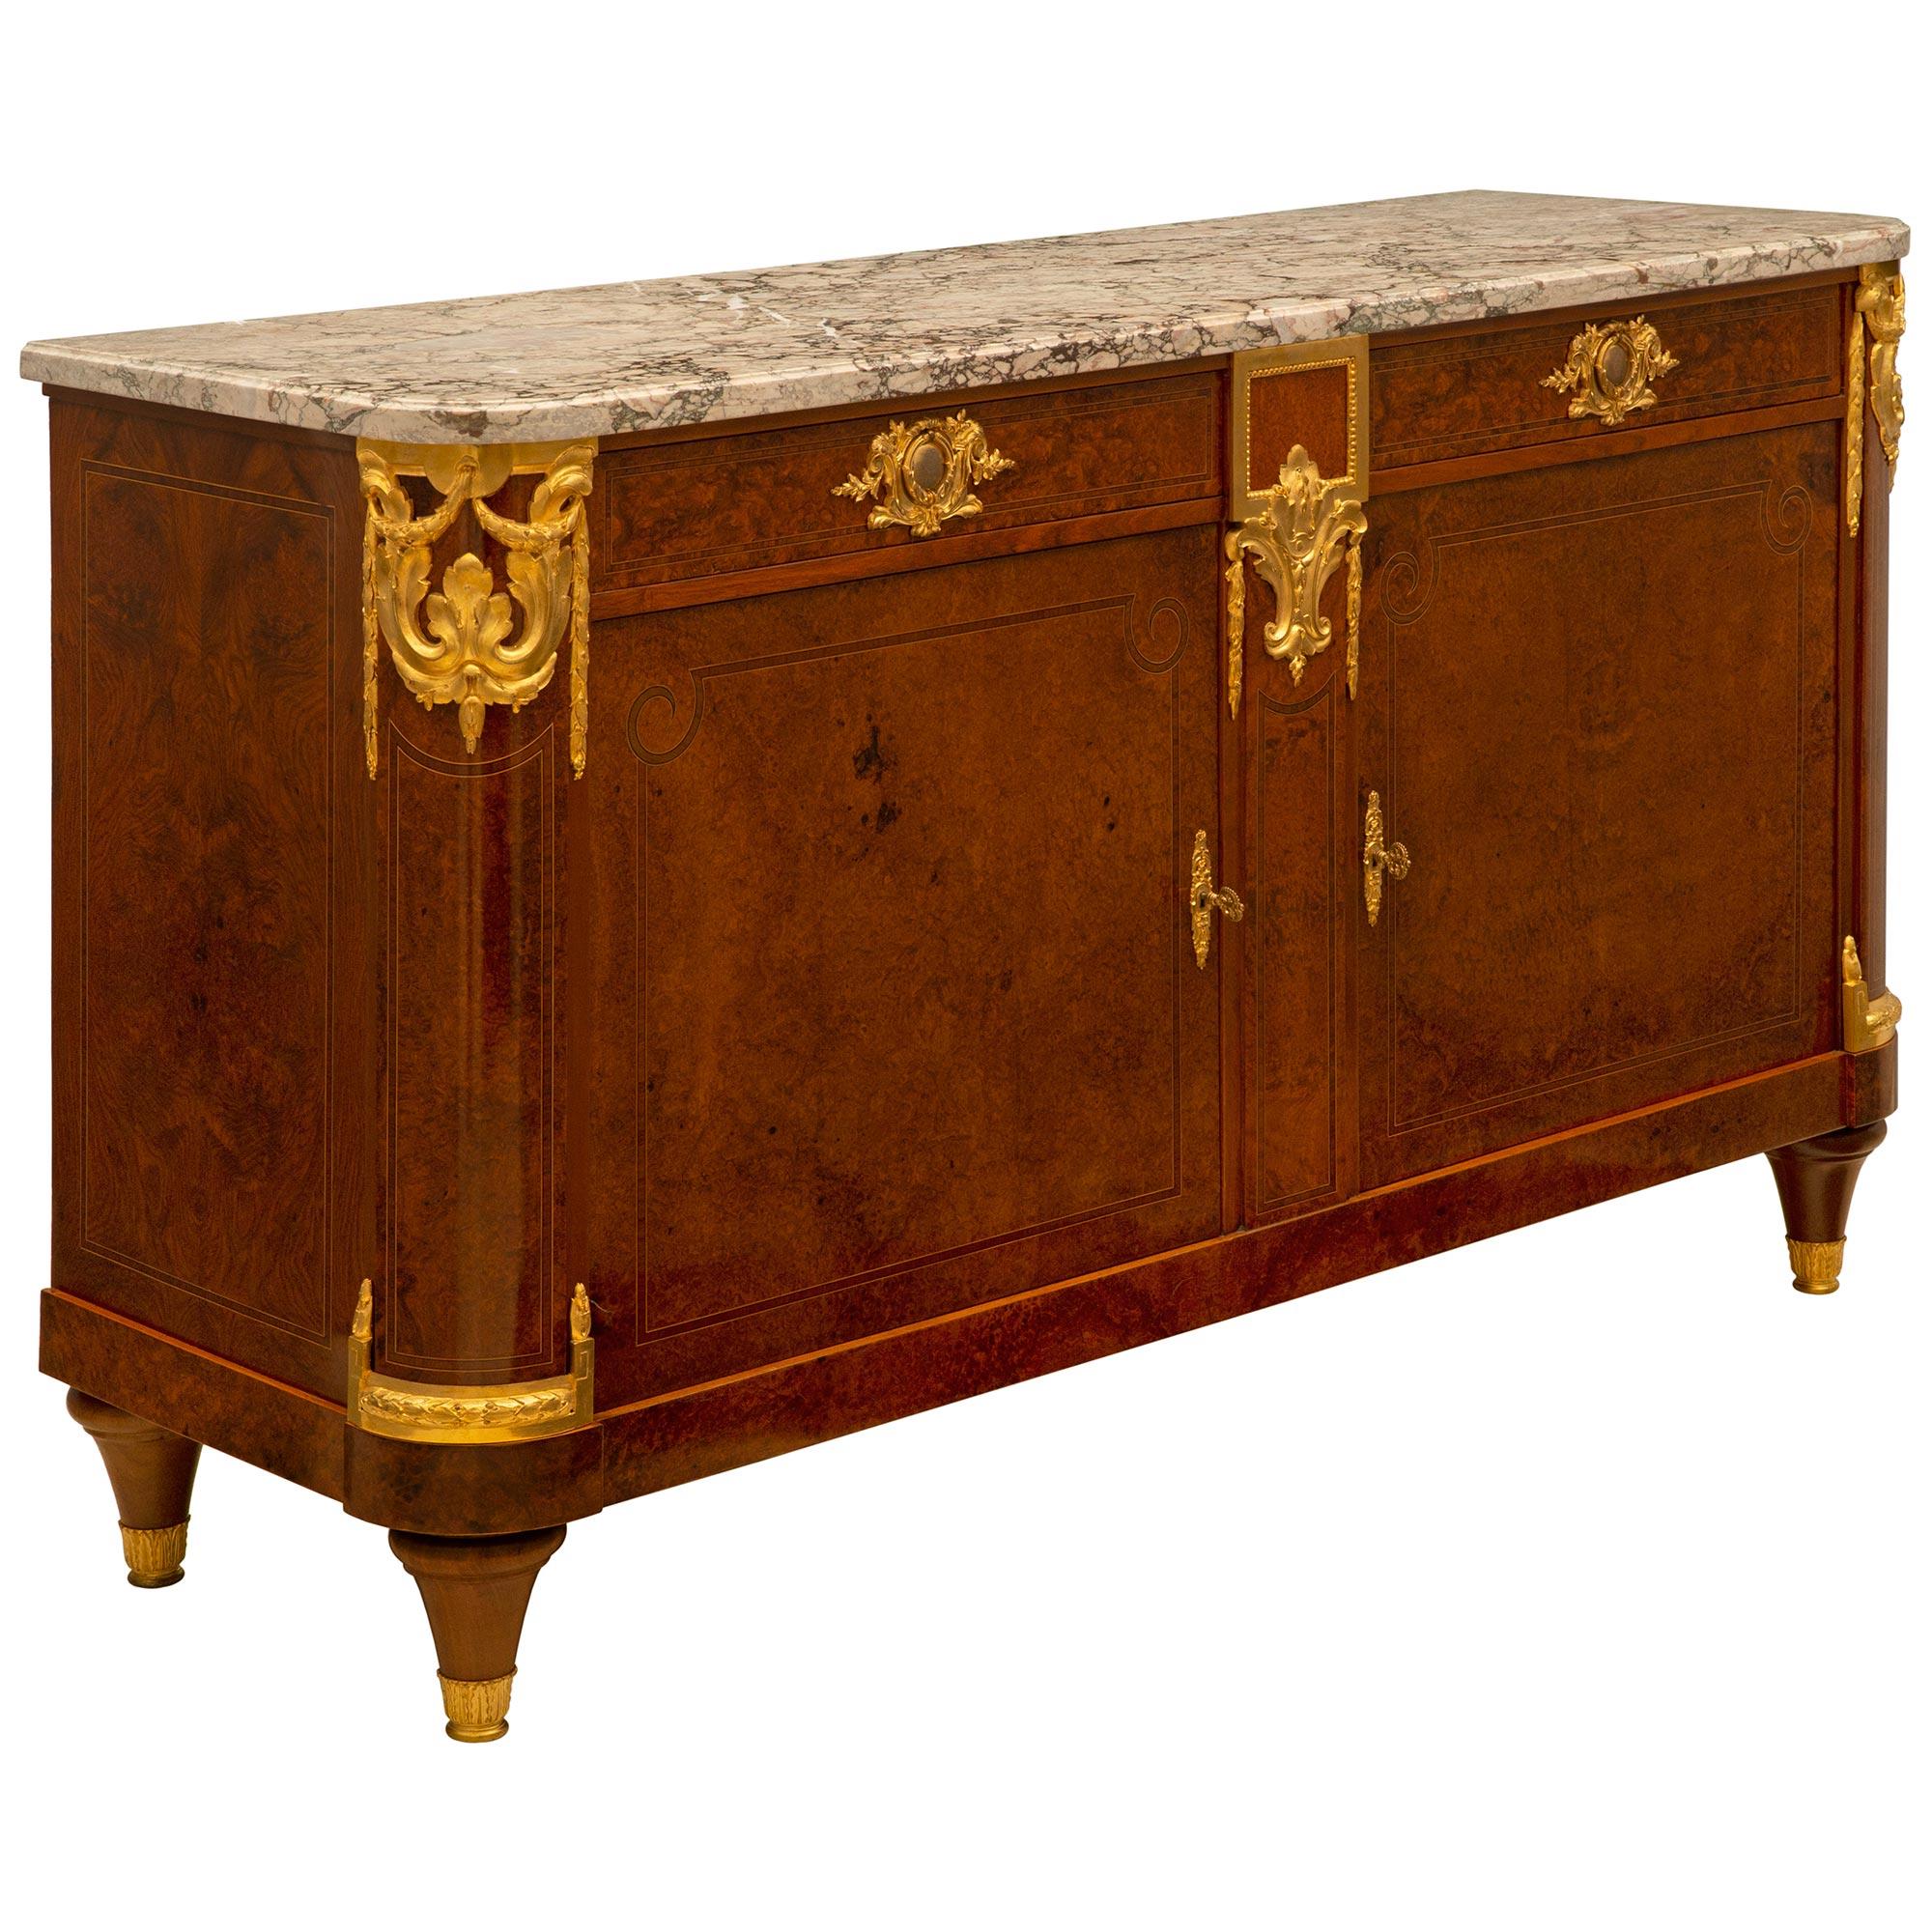 French 19th Century Empire Neoclassical Style Burl Walnut and Ormolu Buffet For Sale 1